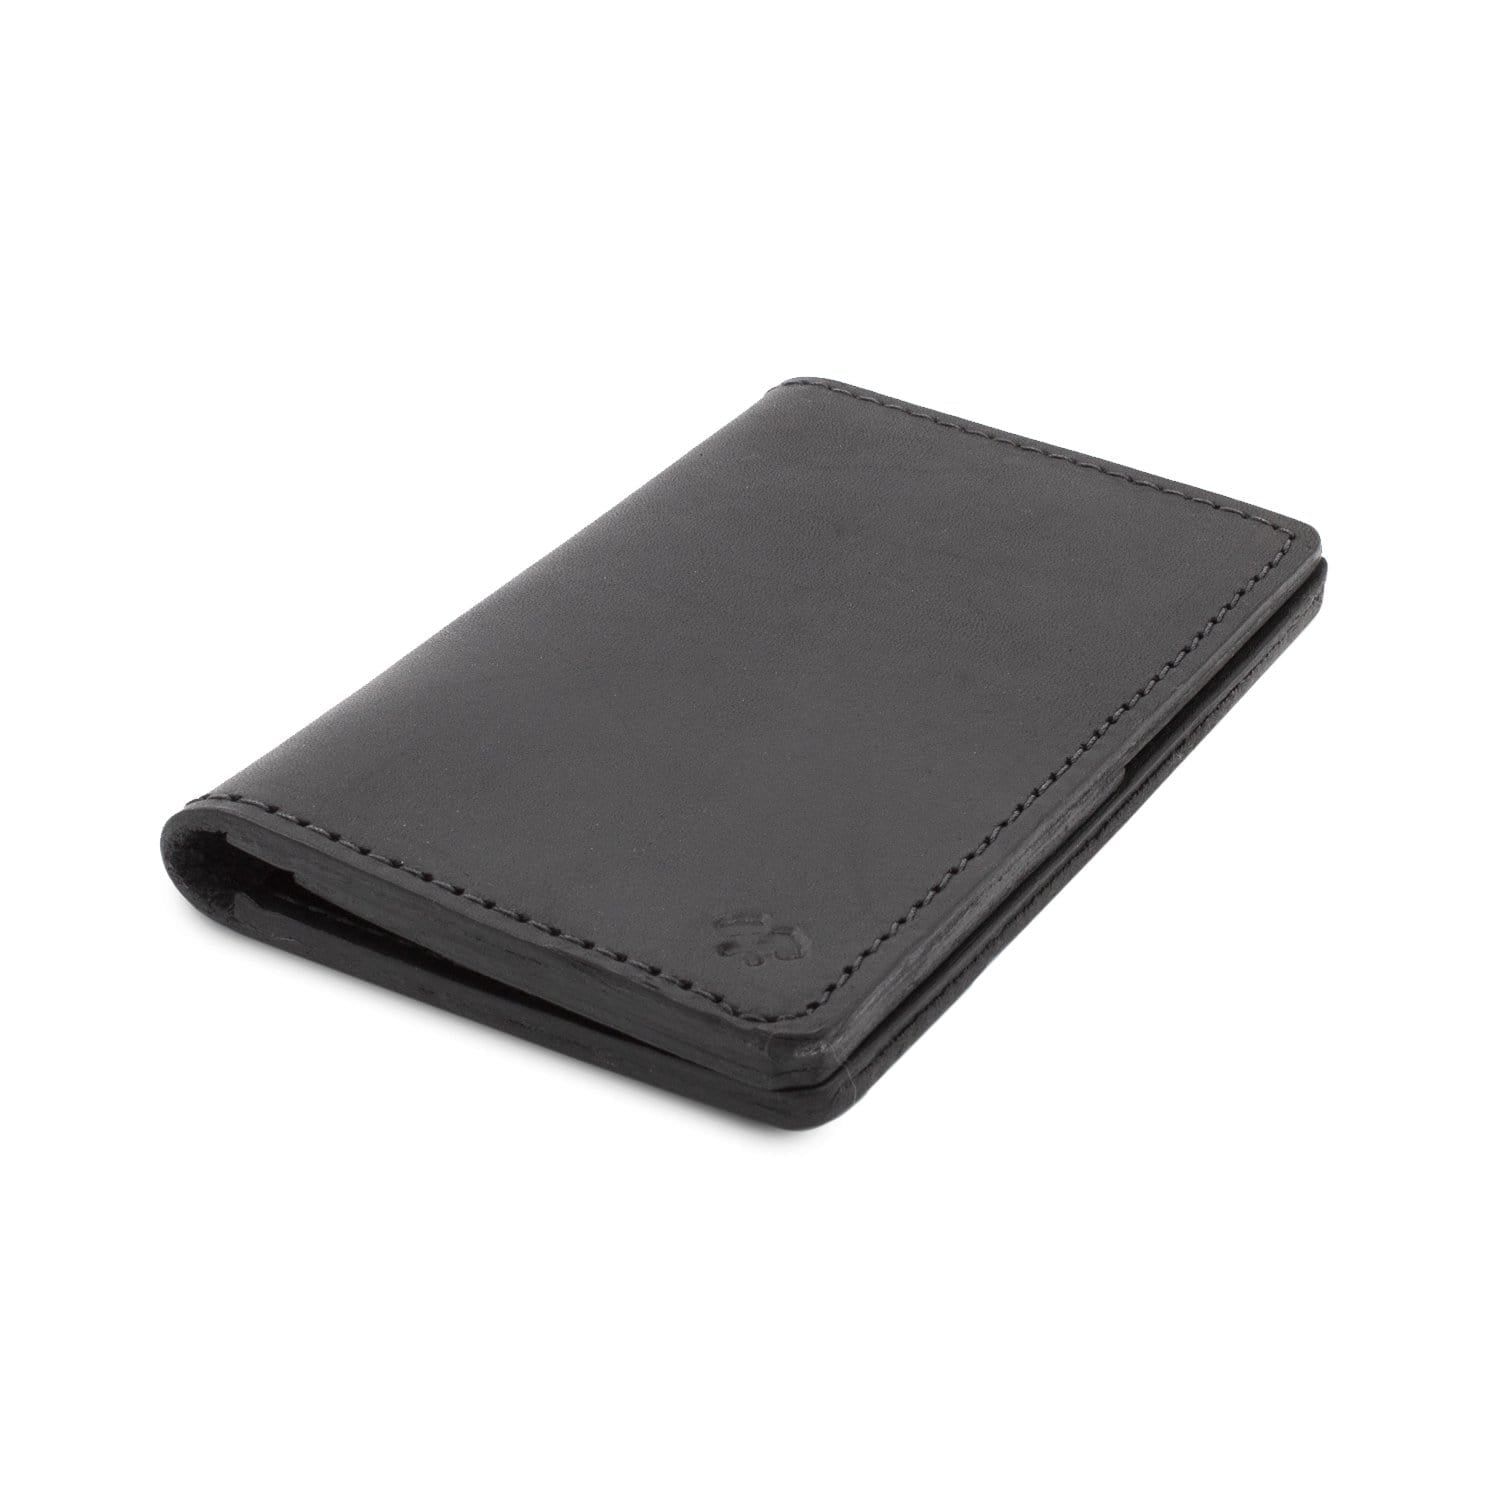 Main Street Forge Small Goods Midnight Black Leather Passport Holder | Full Grain Leather Cover | Perfect for Travel | Made in USA